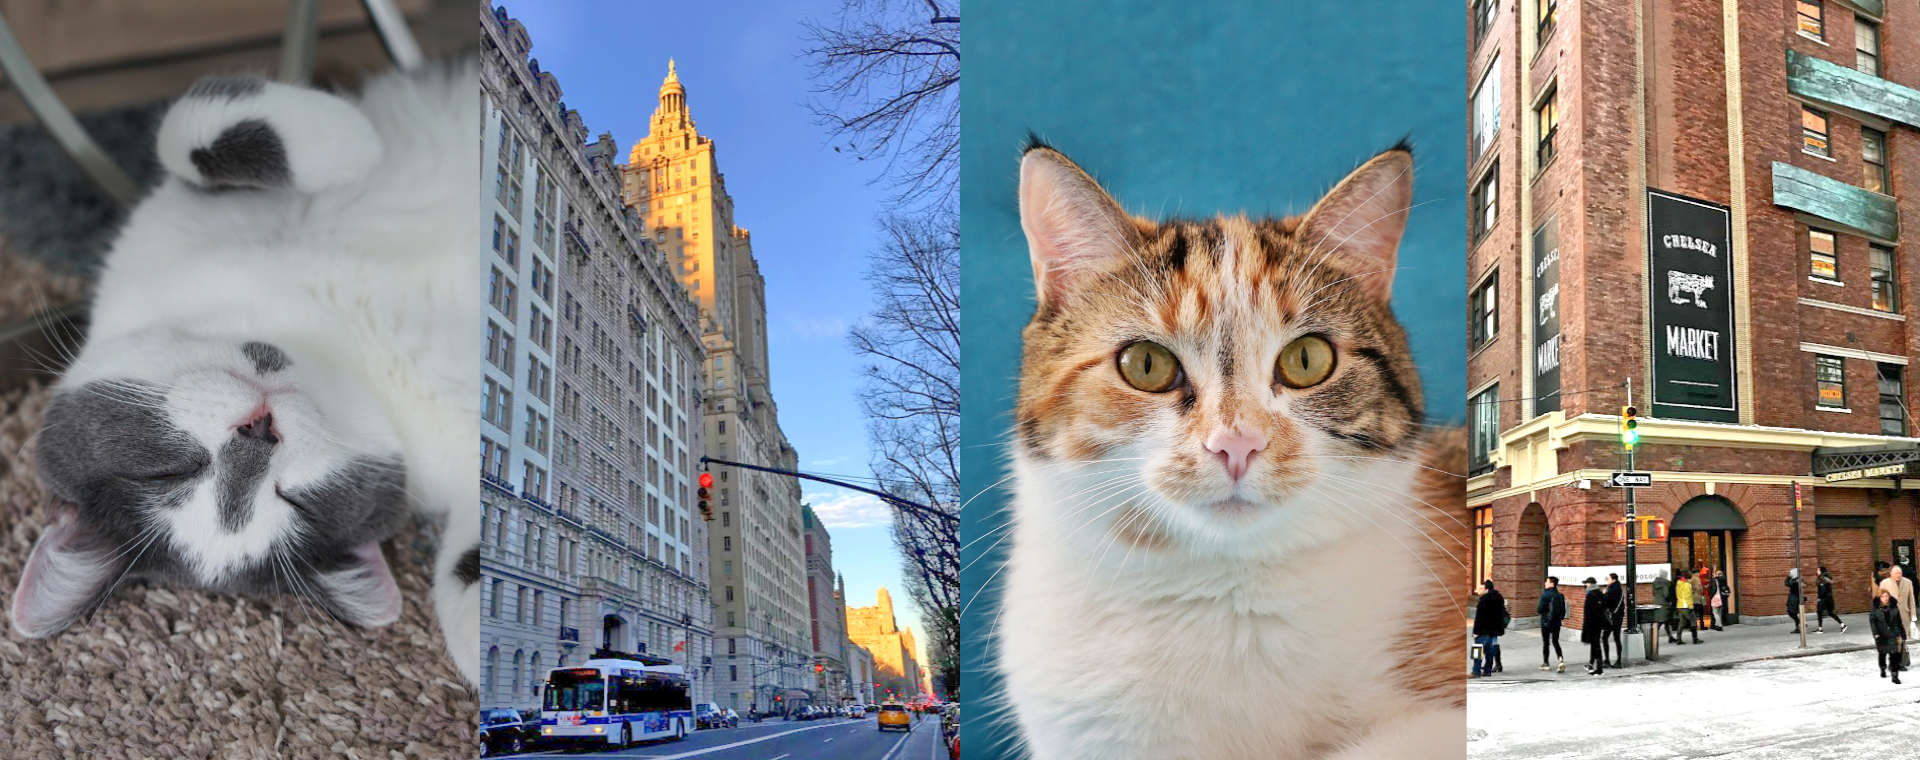 NYC Cat Sitter Bonded Cat Sitting Services in New York City